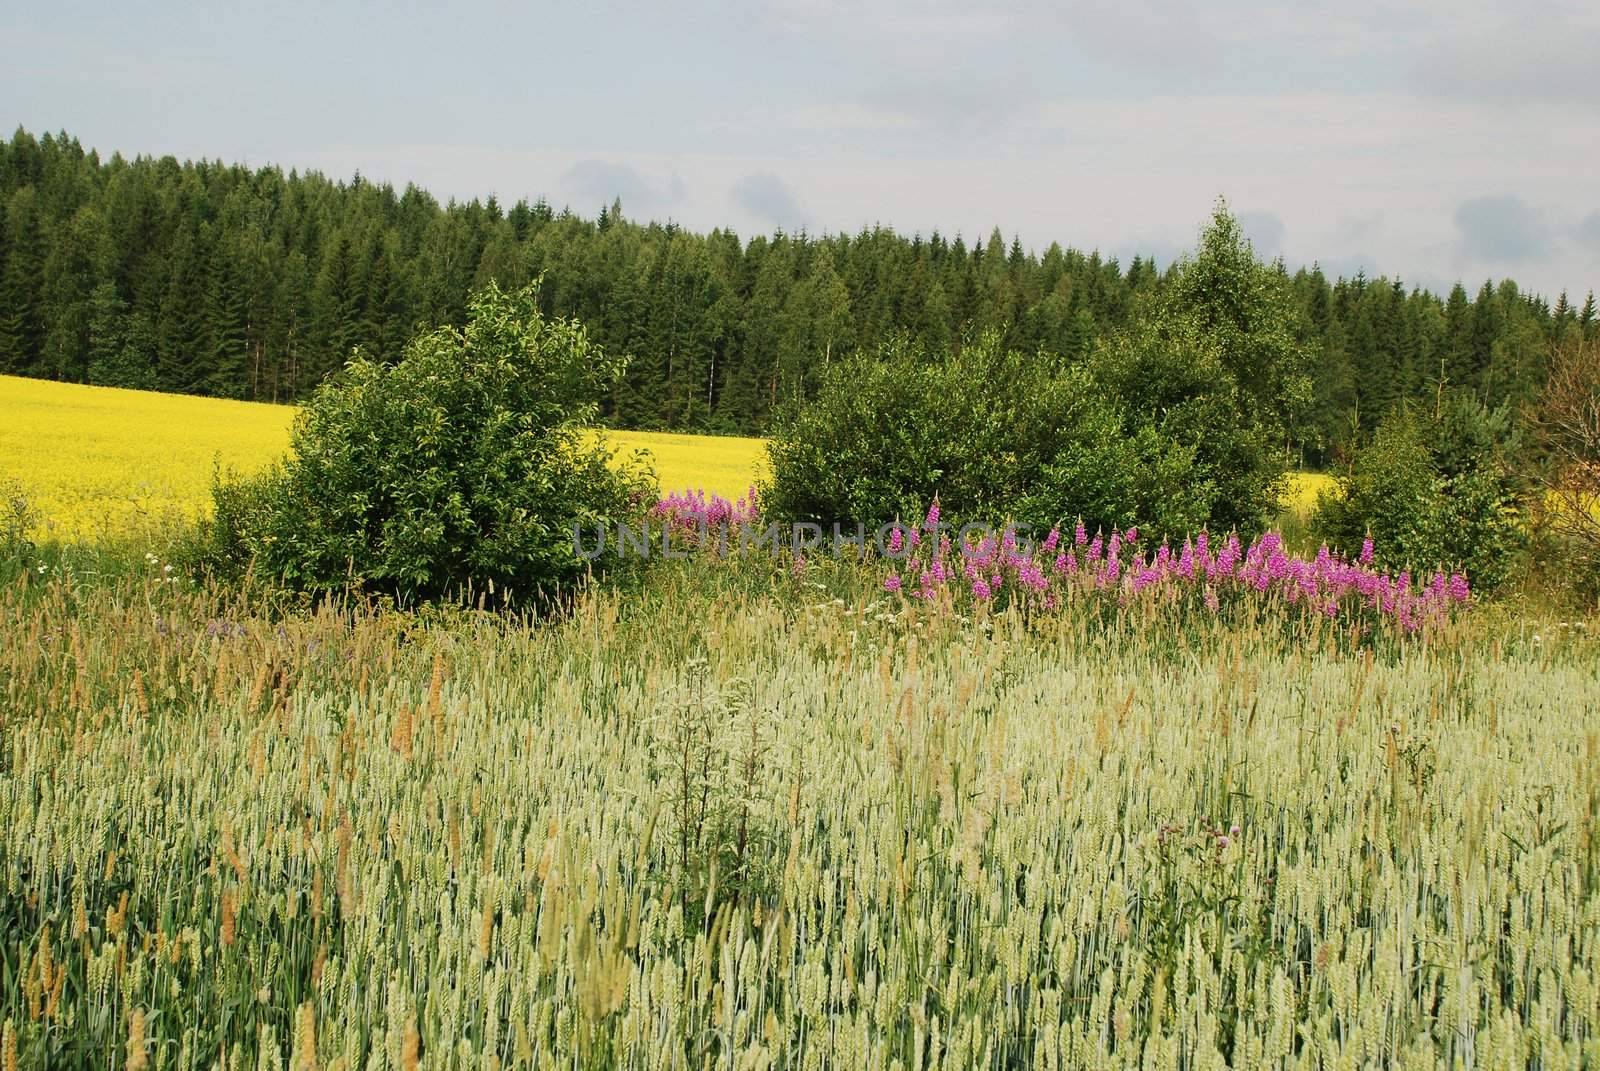 Fields and forests of Uusimaa region in Finland. Wheat is at foreground, rapeseed fiels behind is separaded by lupins and other plants